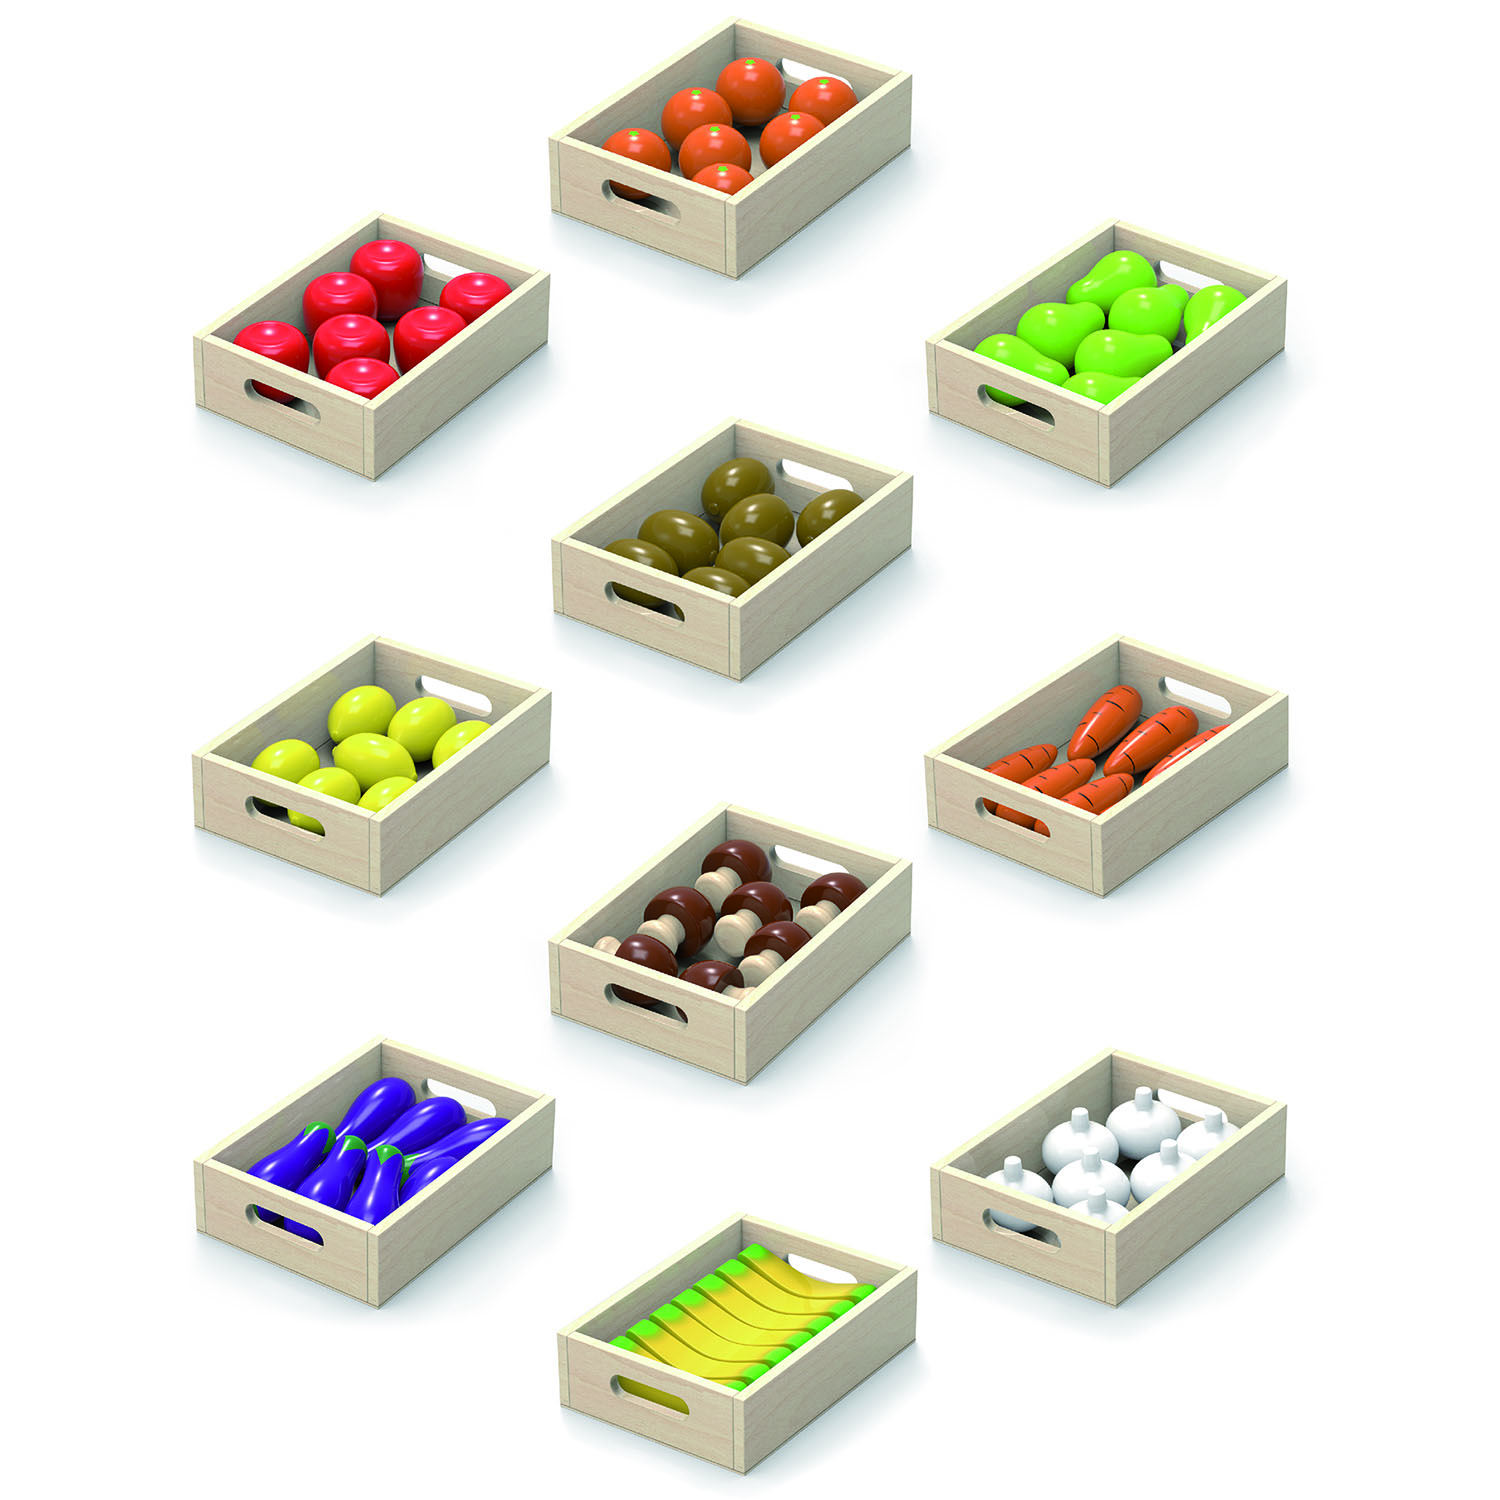 10 crated filled with various wooden fruit and vegetables